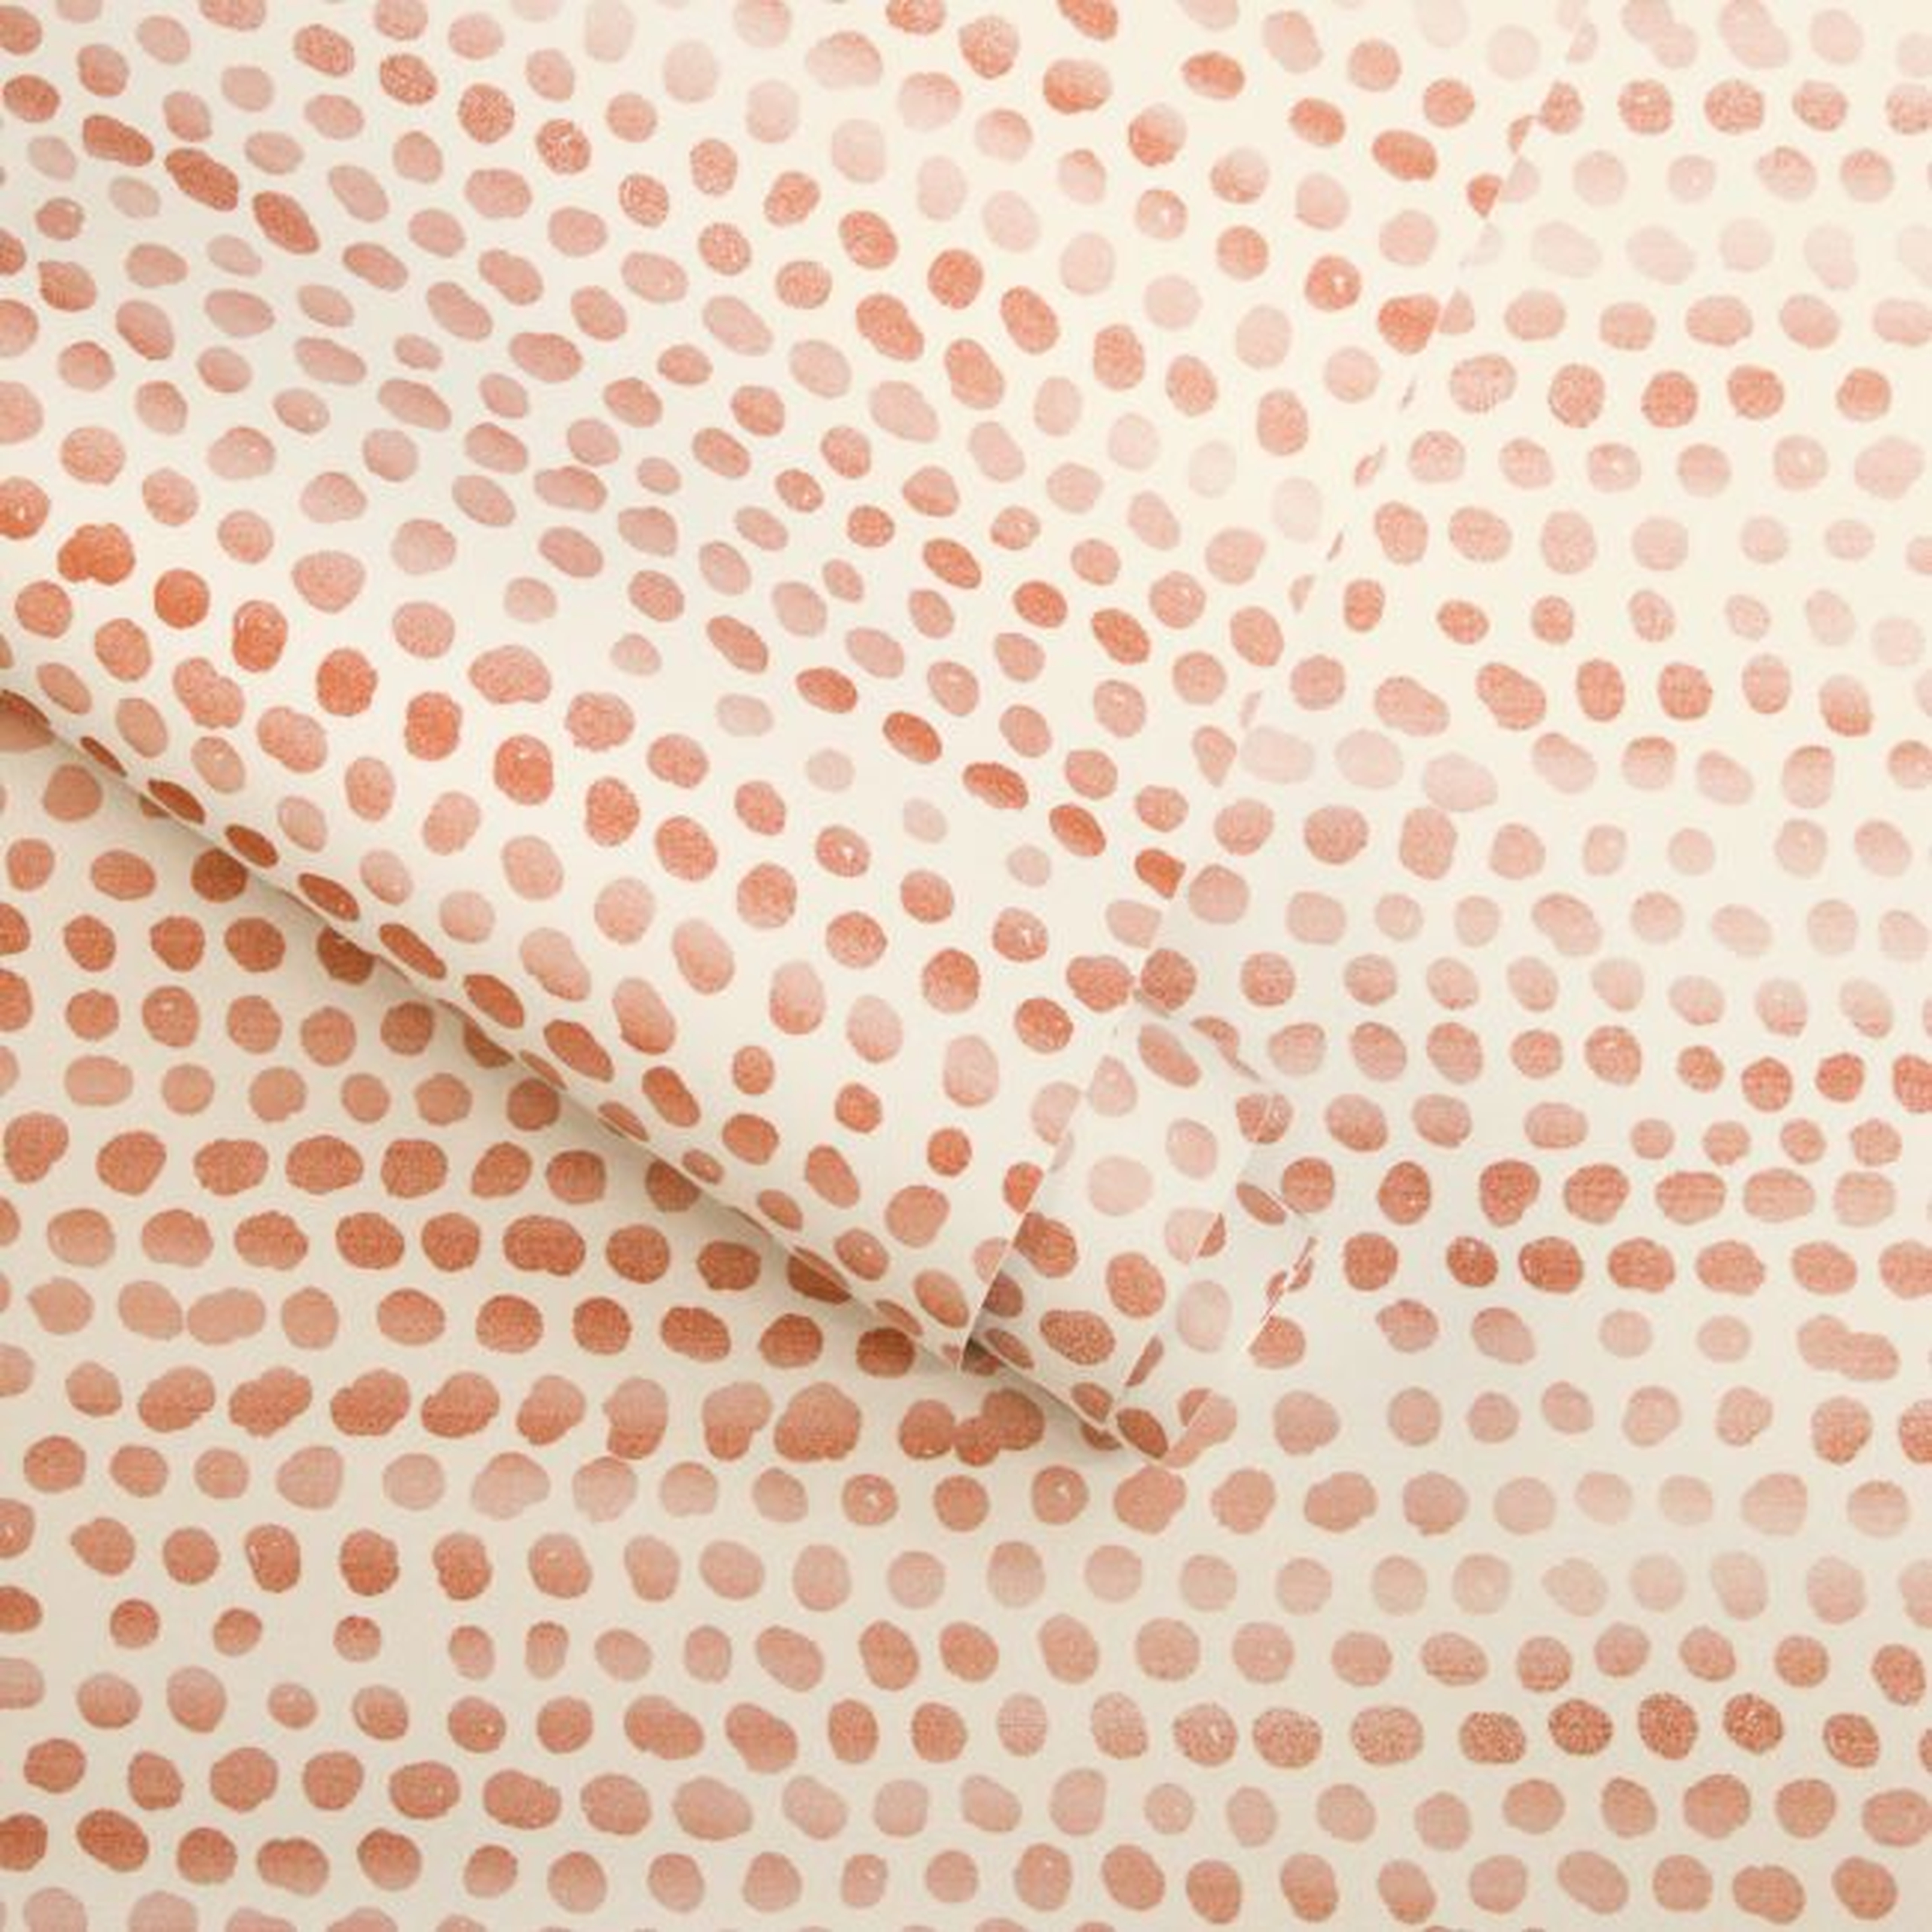 Tempaper Coral Moire Dots Removable Wallpaper - Crate and Barrel